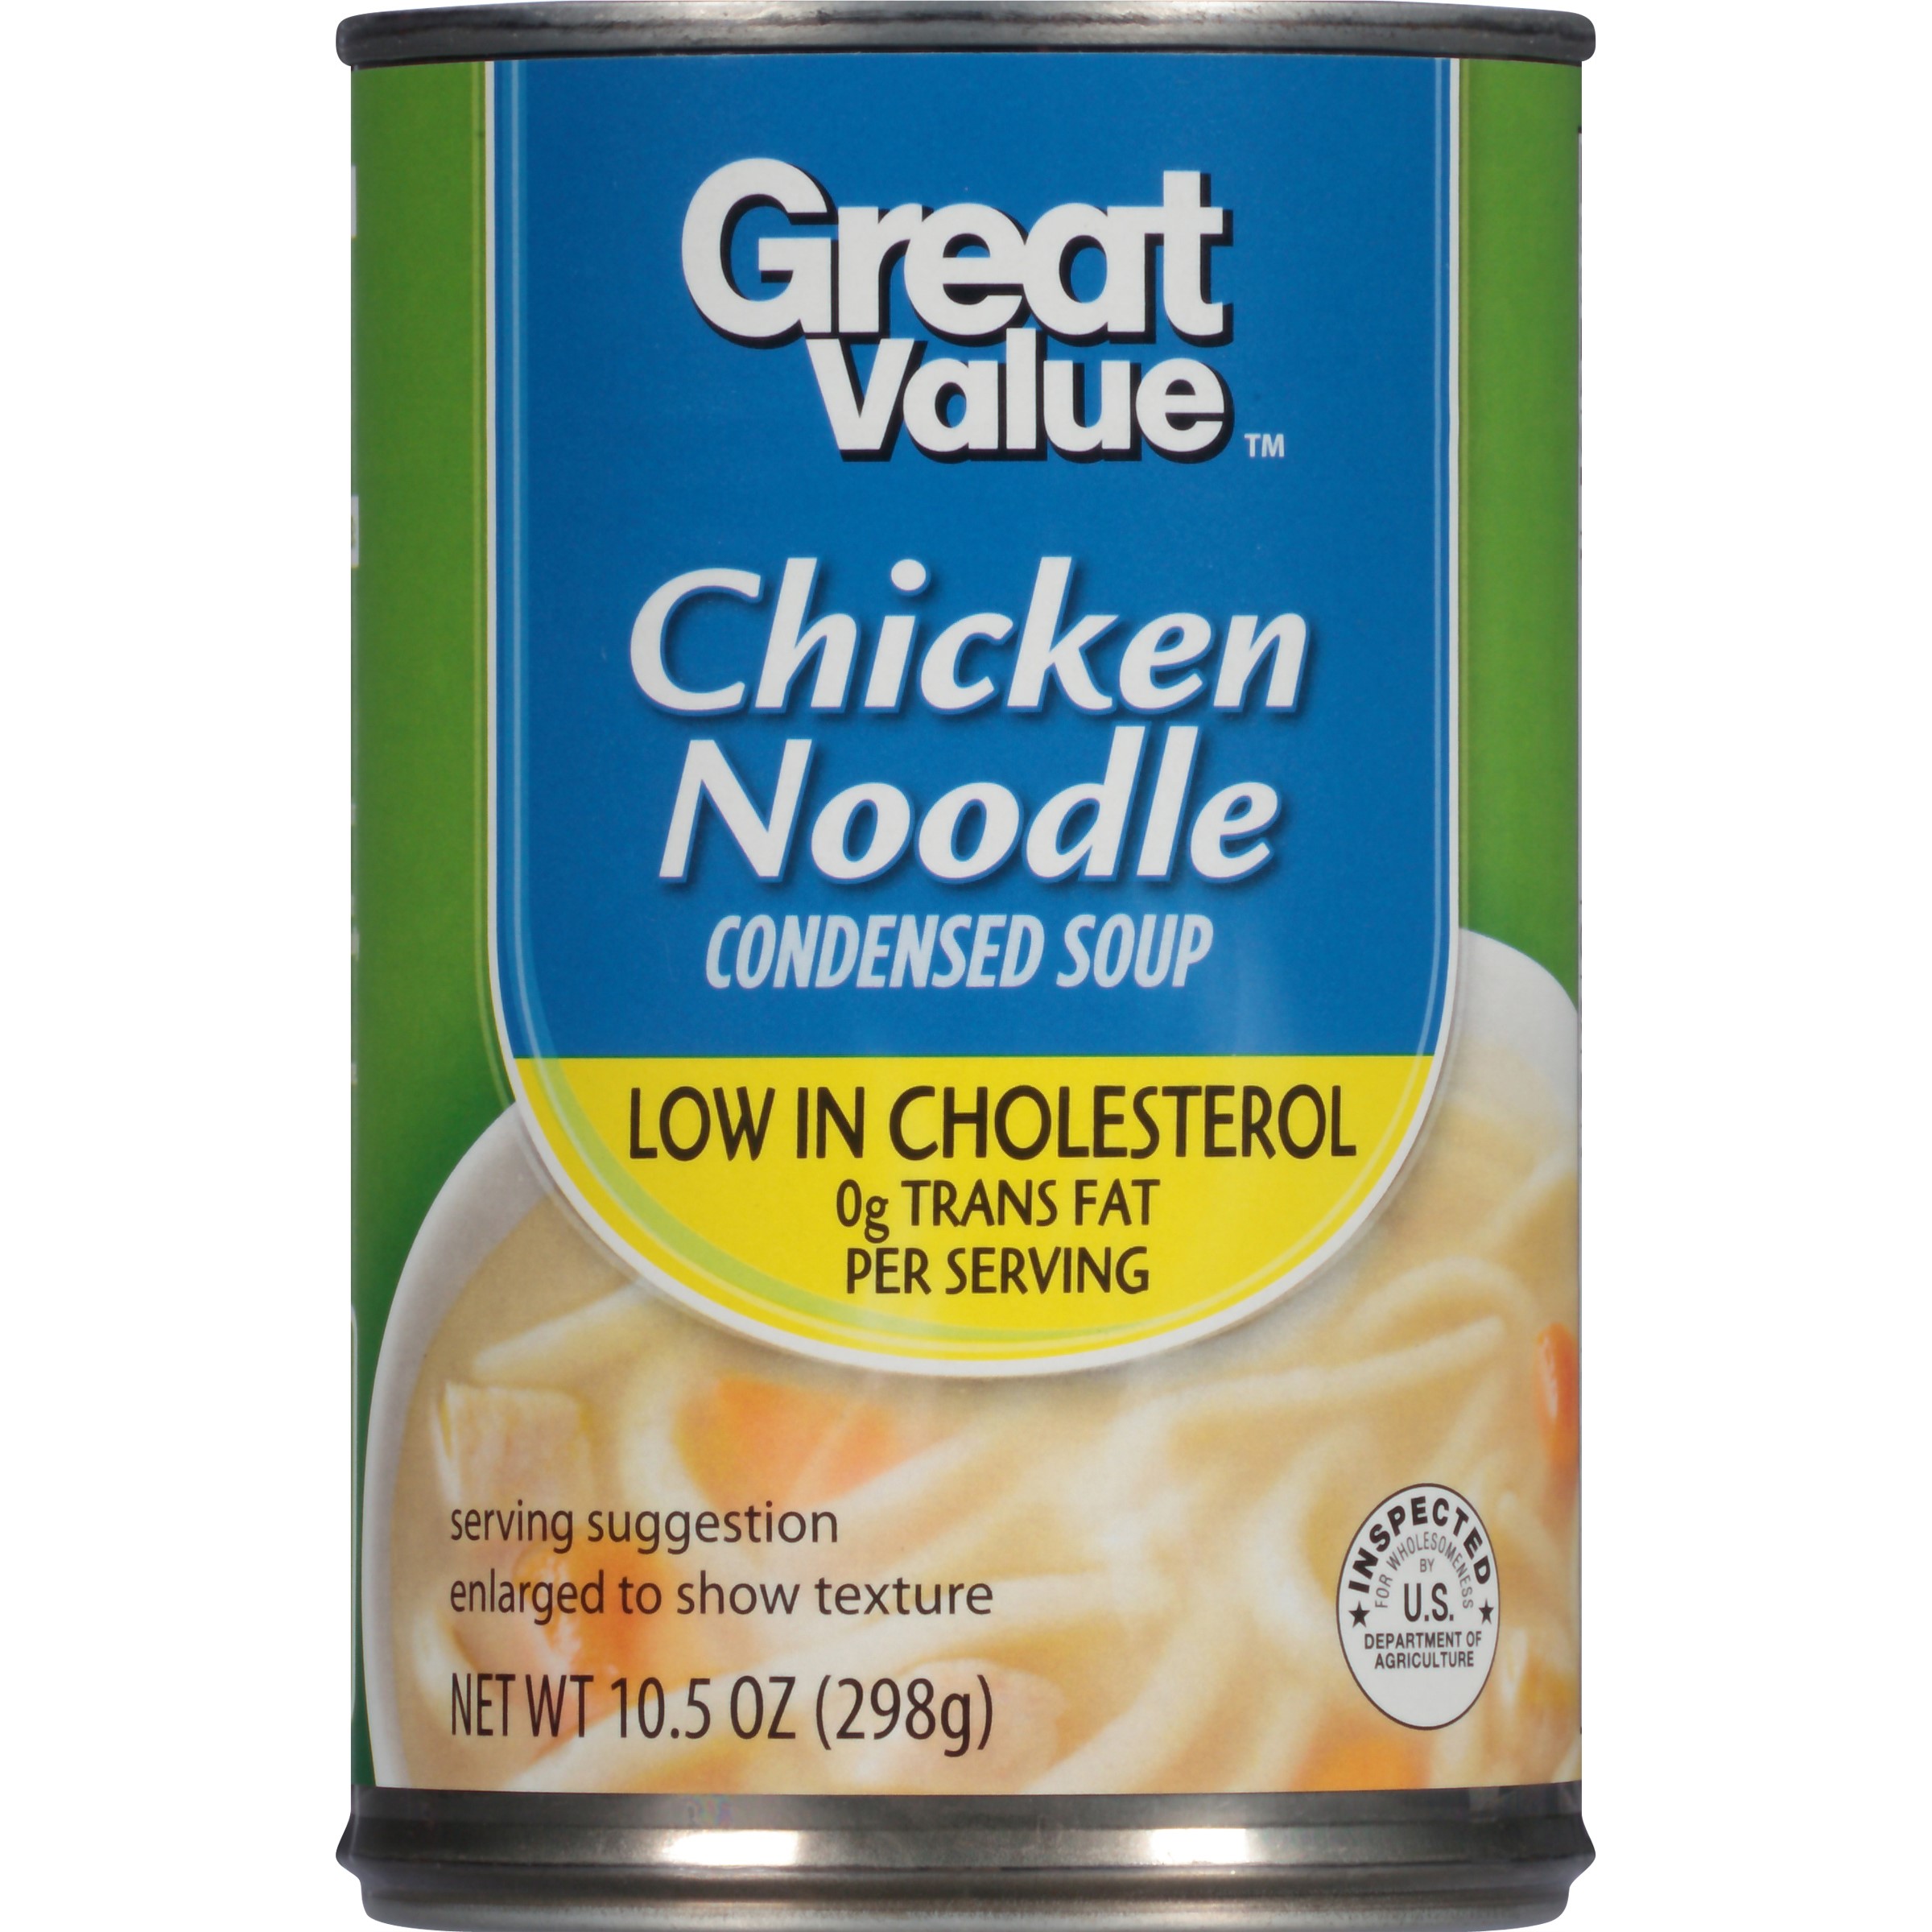 (8 Pack) Great Value Chicken Noodle Condensed Soup, 10.5 Oz Image